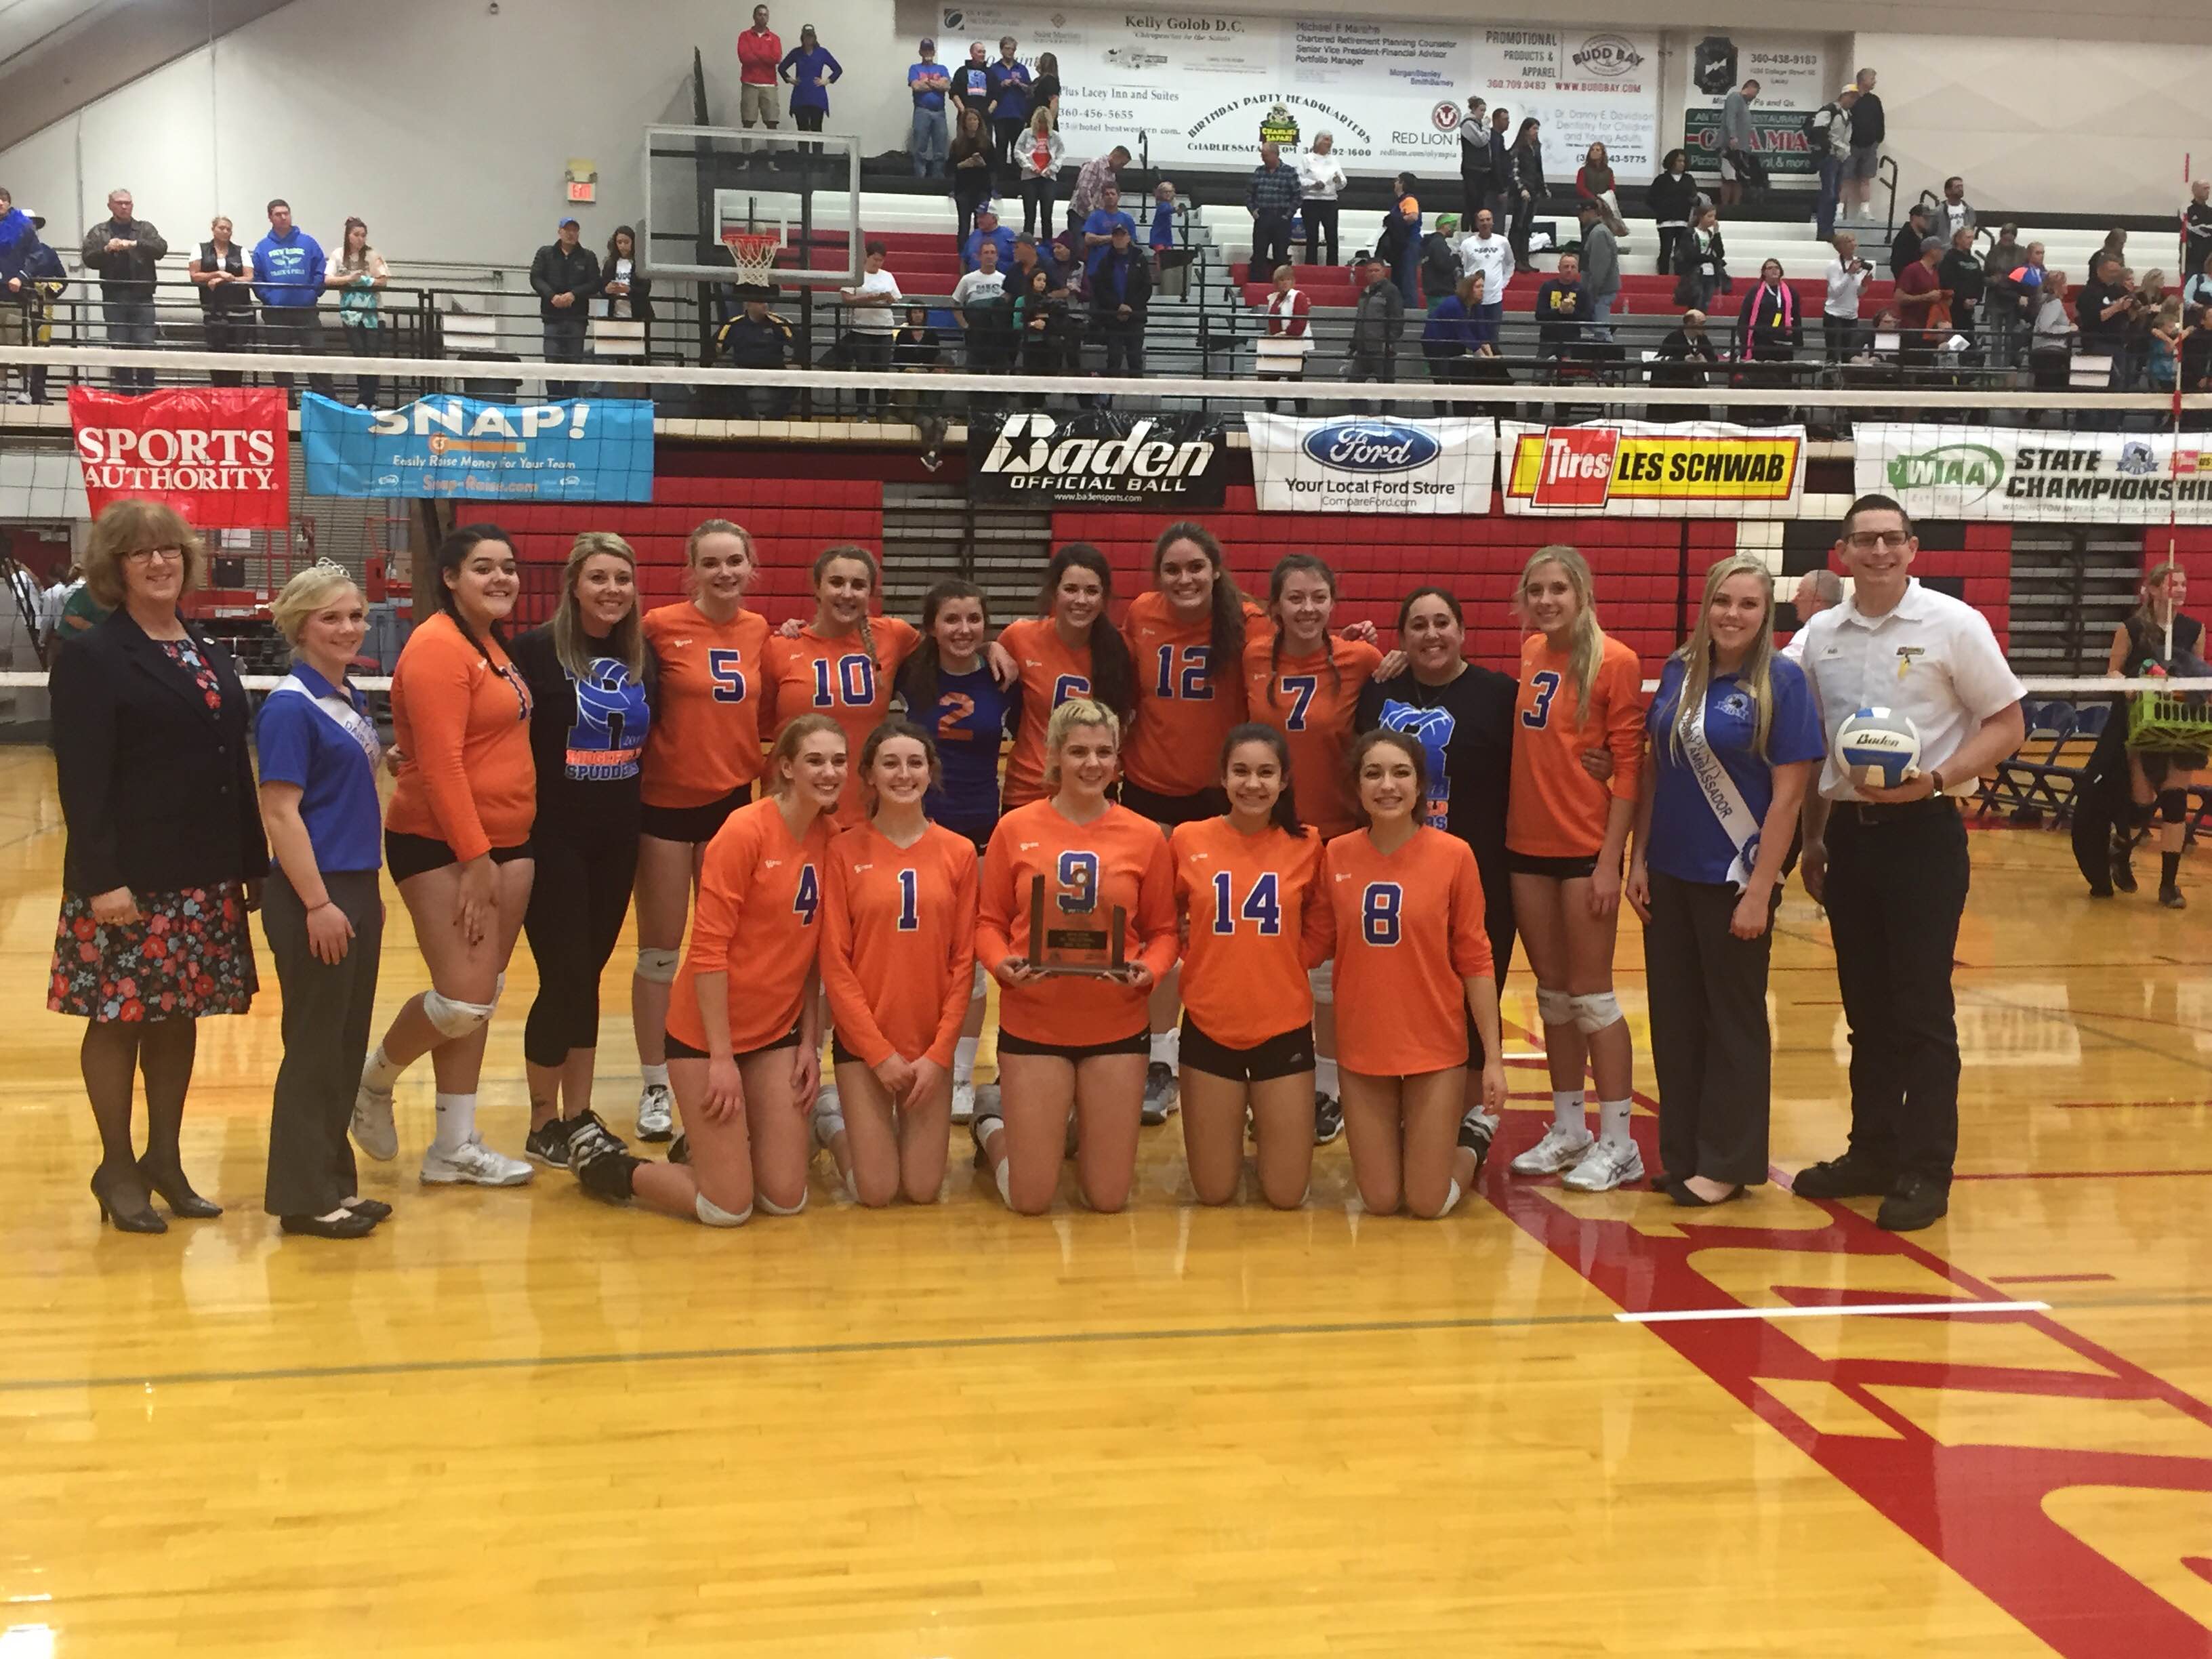 Ridgefield takes home third place in 2A state volleyball.